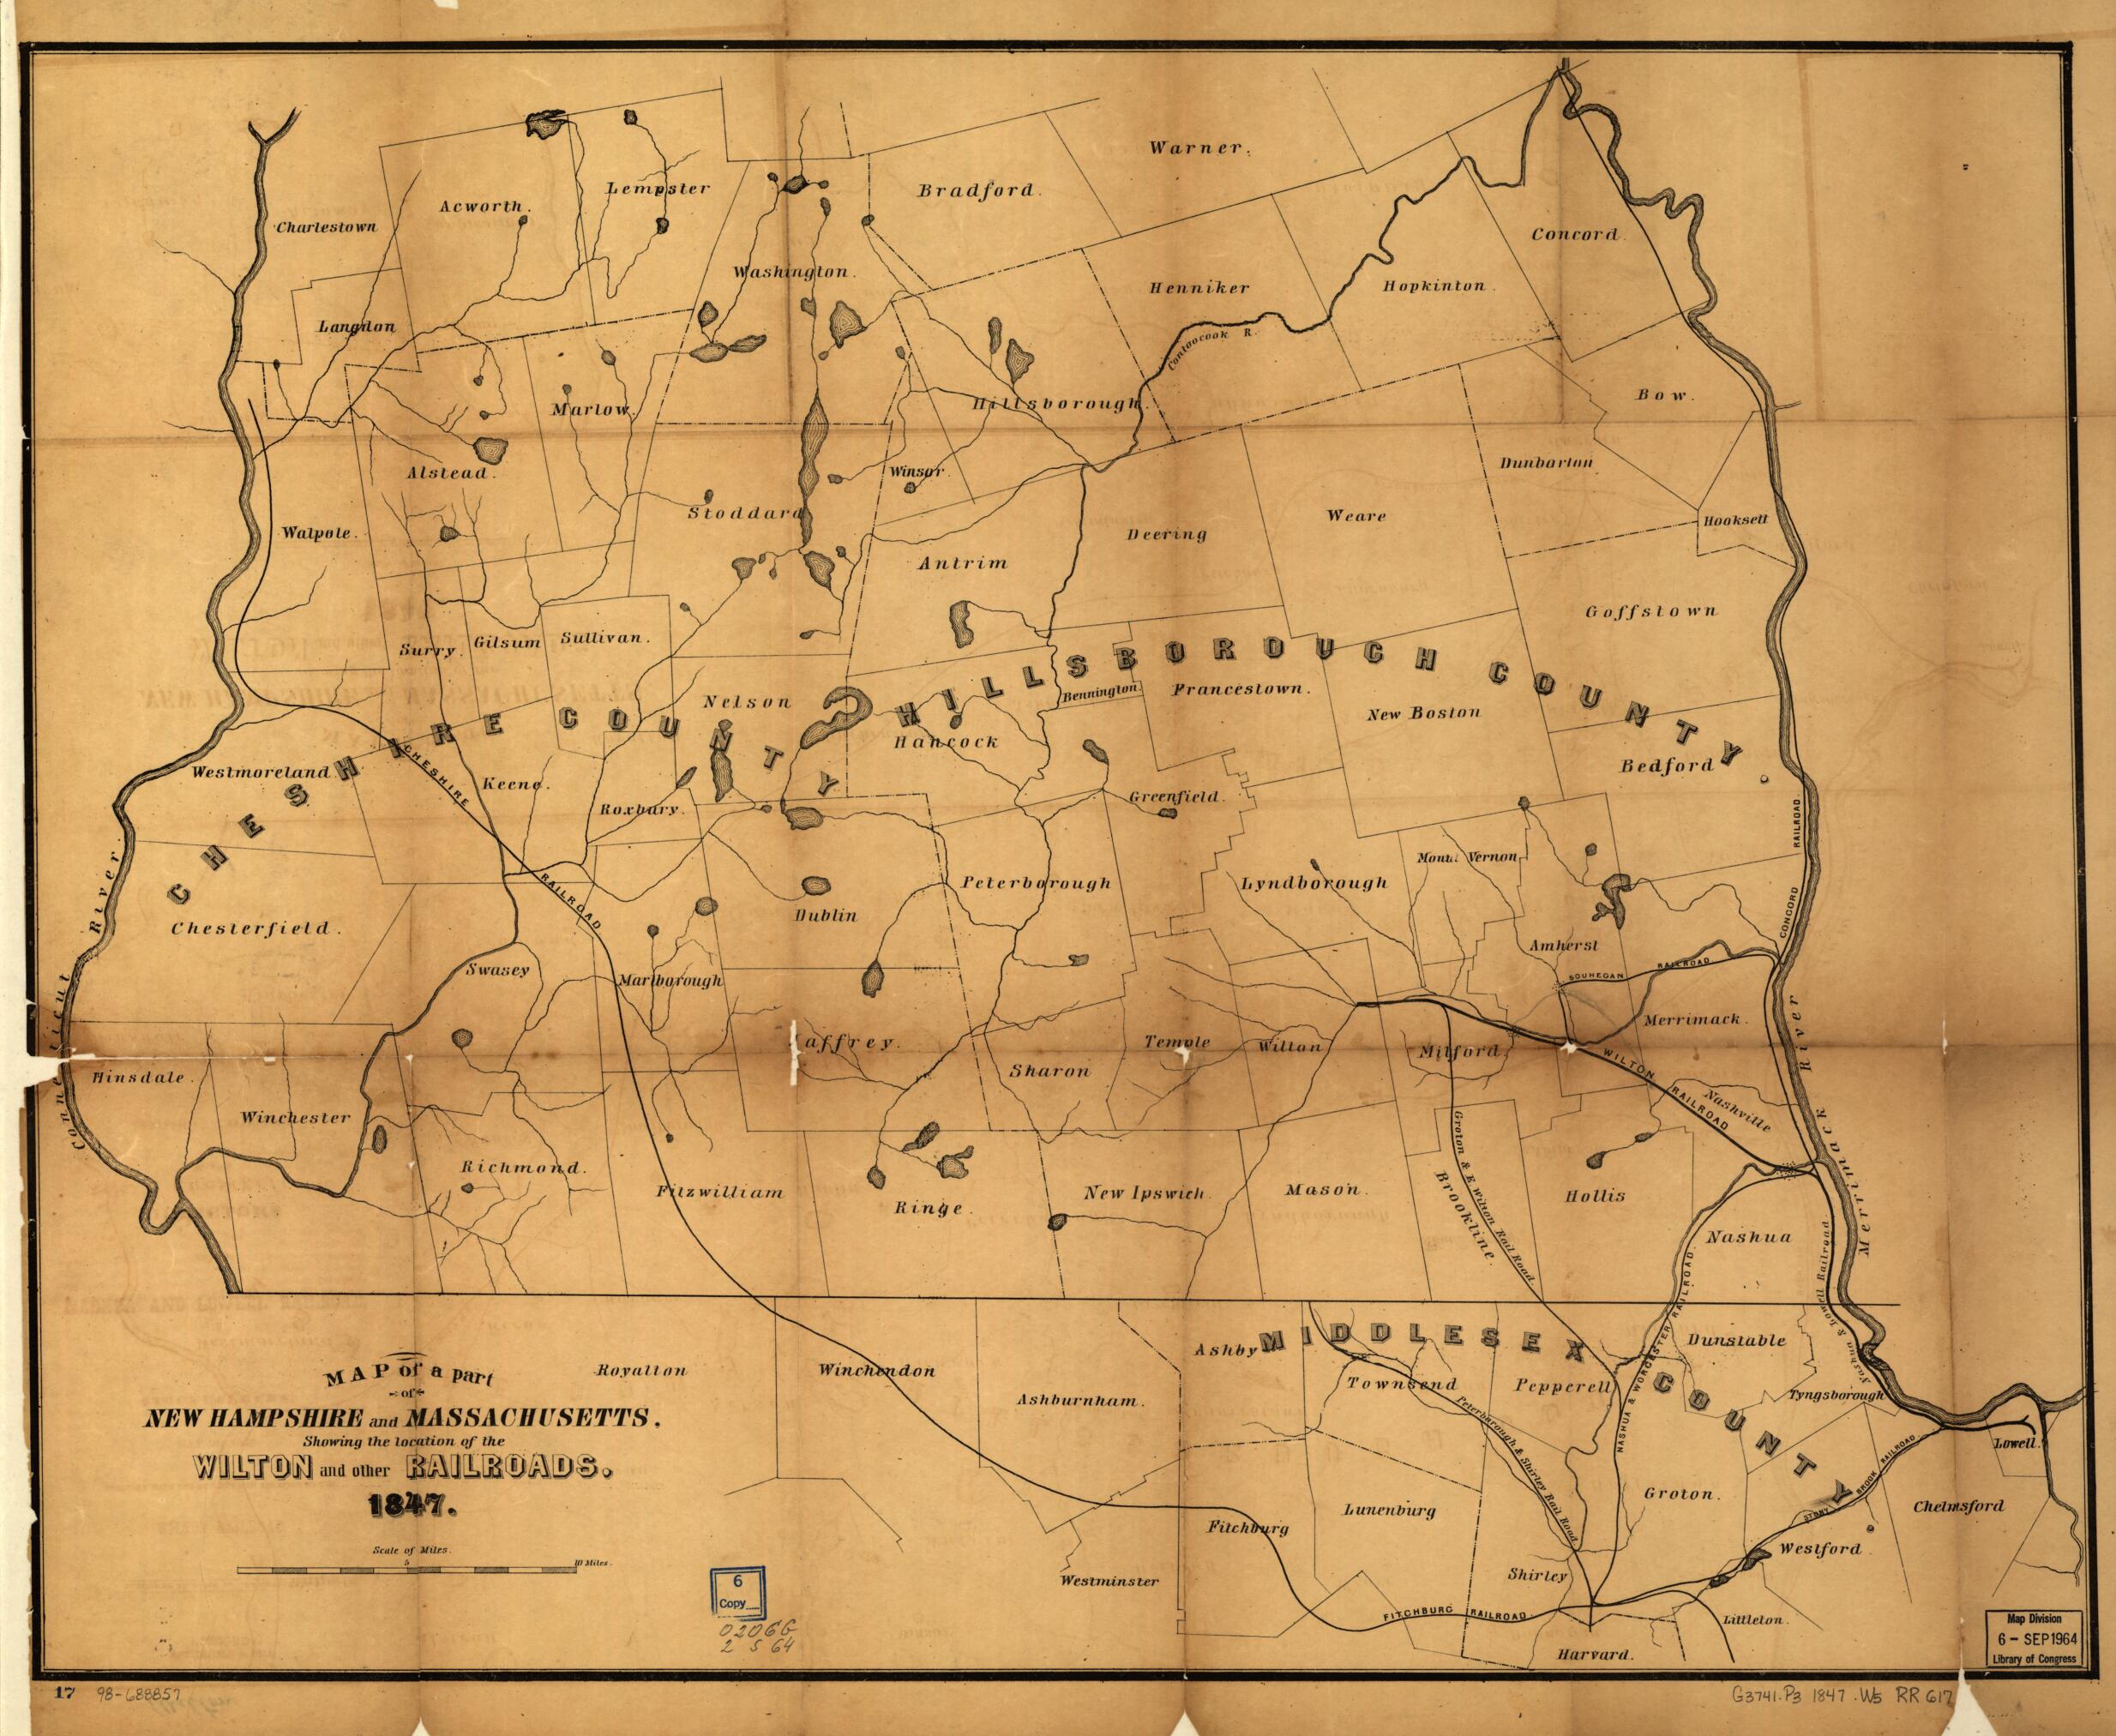 This old map of Map of Part of New Hampshire and Massachusetts, Showing the Location of the Wilton and Other Railroads from 1847 was created by  Wilton Railroad Company in 1847